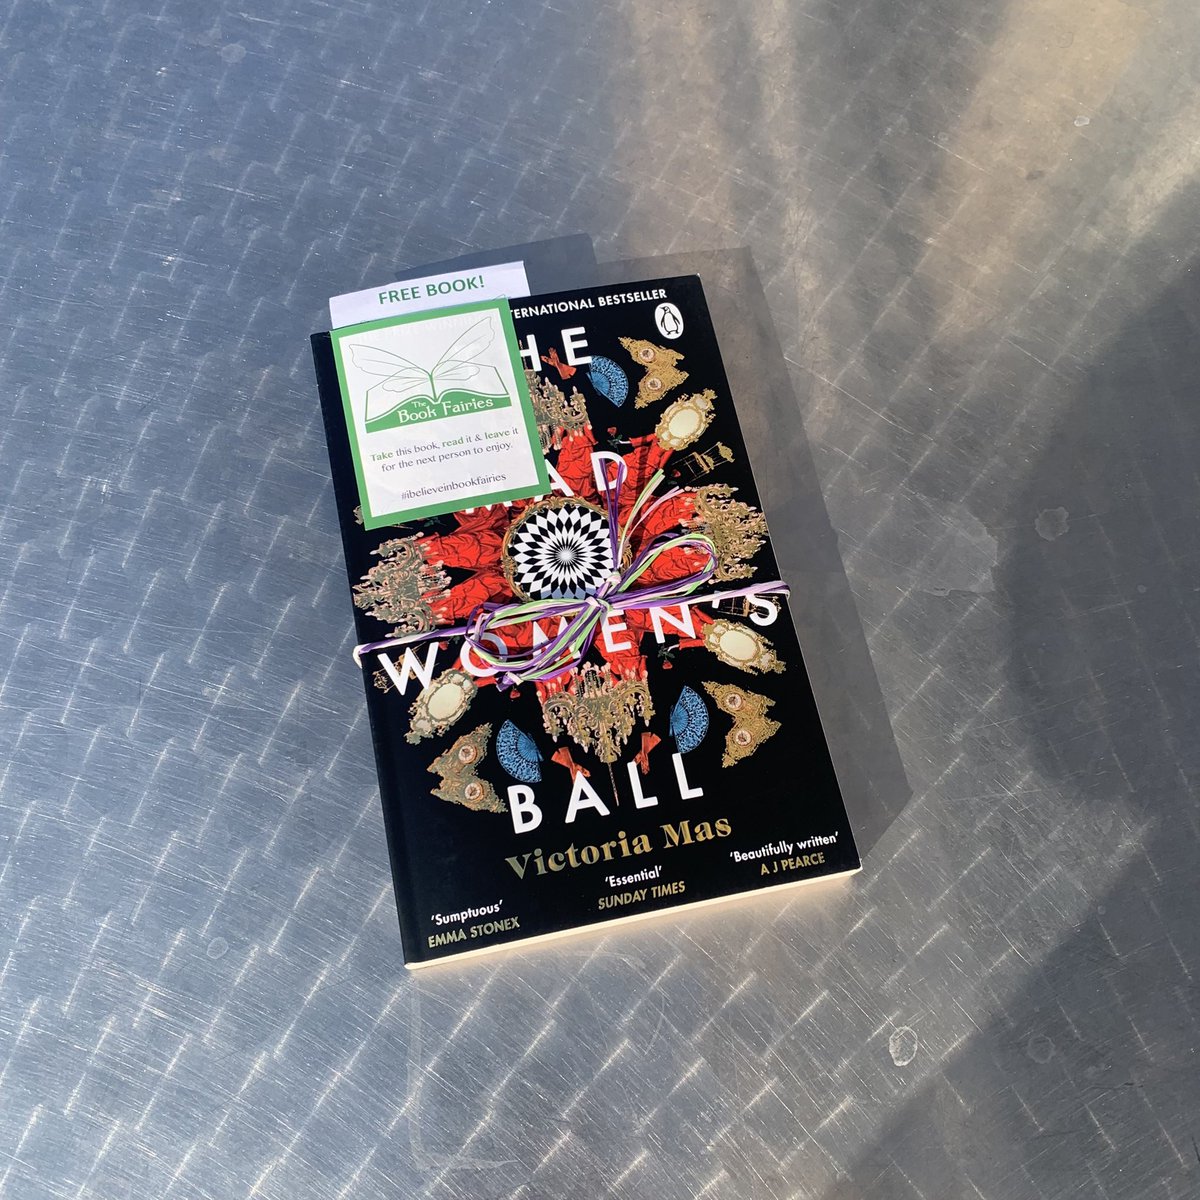 Happy Birthday Book Fairies!As our birthday is on #InternationalWomensDay we are sharing books that celebrate women! The Mad Women's Ball by Victoria Mas was left in #Falkirk! #IBelieveInBookFairies #BookFairiesTurn5 #IWDBookFairies #BookFairyBirthday #TheMadWomensBall #IWD